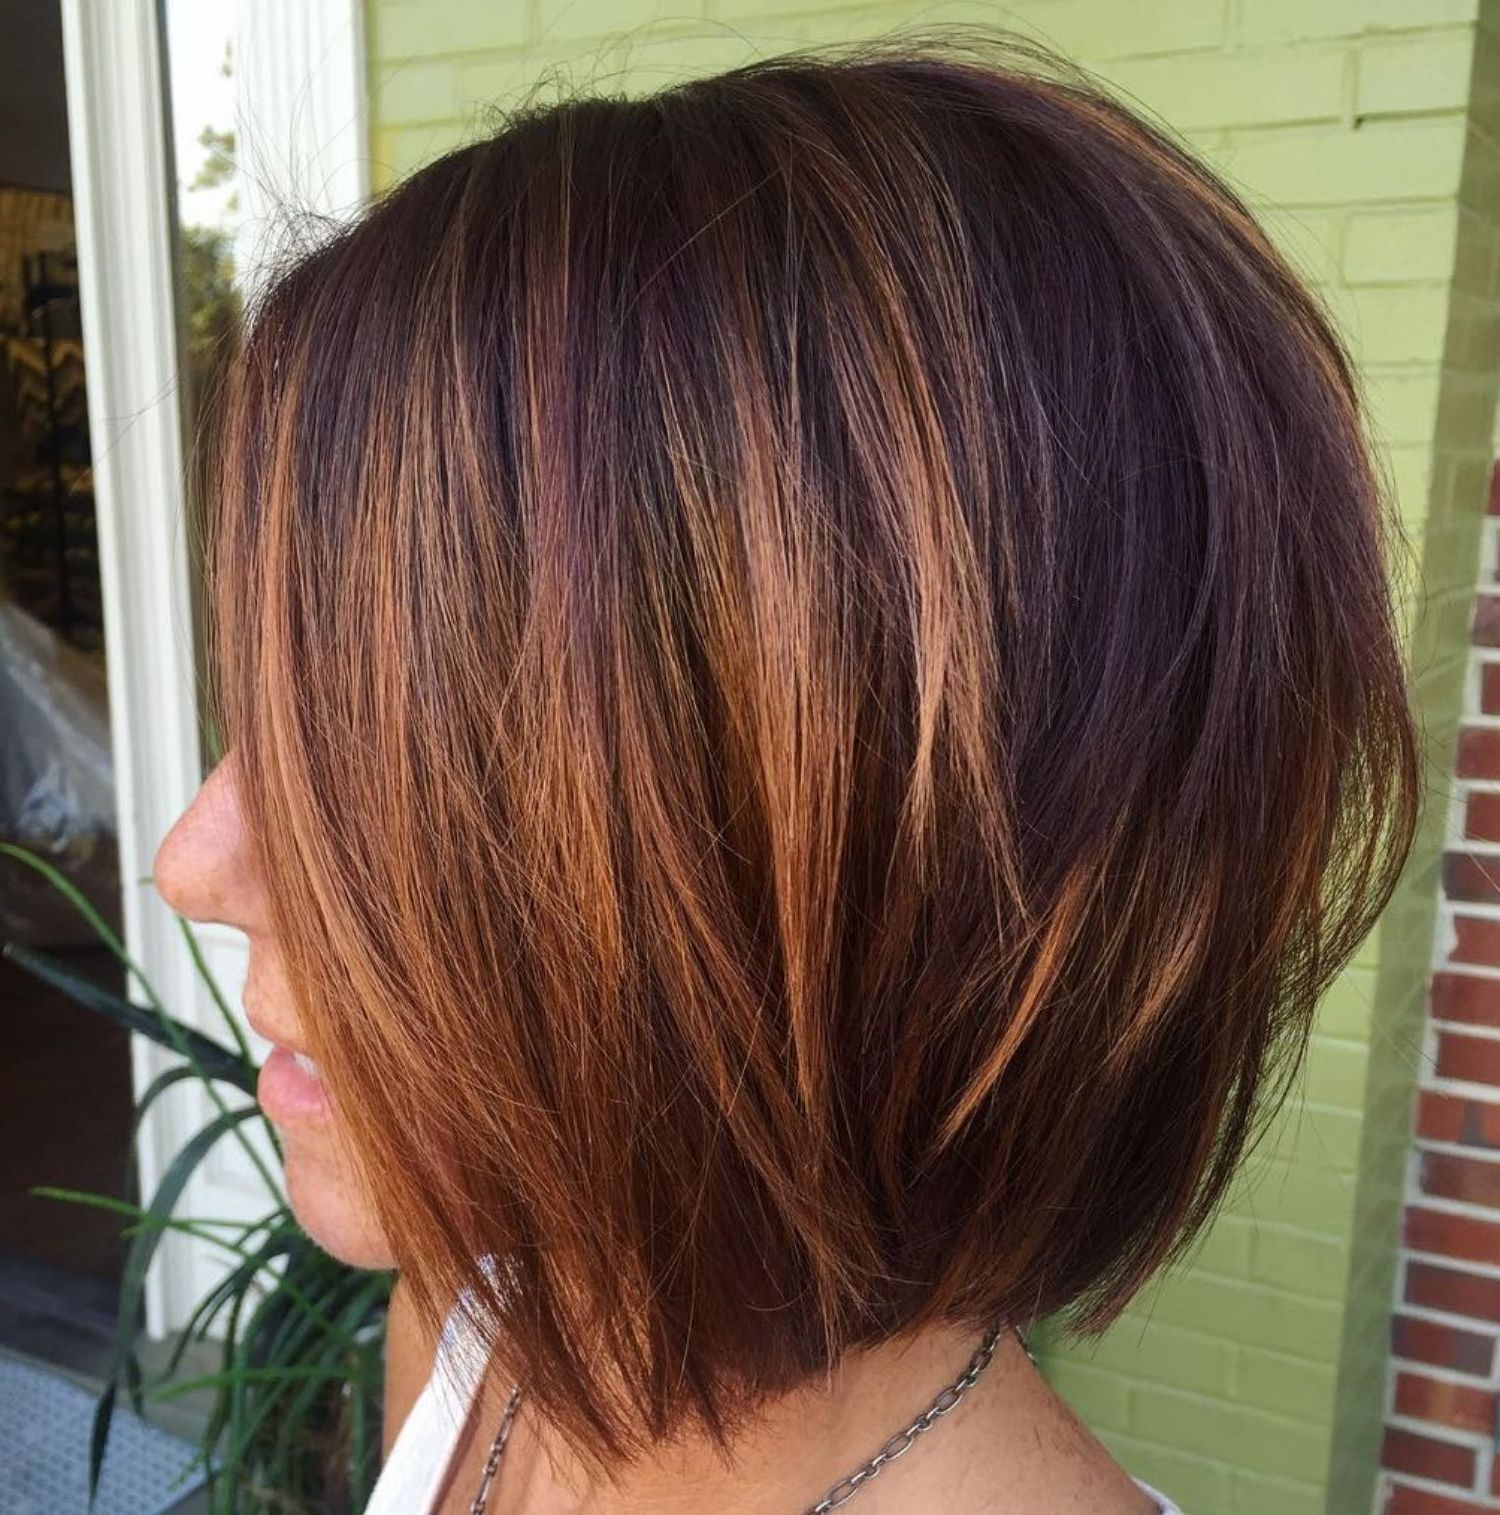 60 Layered Bob Styles: Modern Haircuts With Layers For Any Occasion With Regard To Layered Caramel Brown Bob Hairstyles (View 1 of 20)